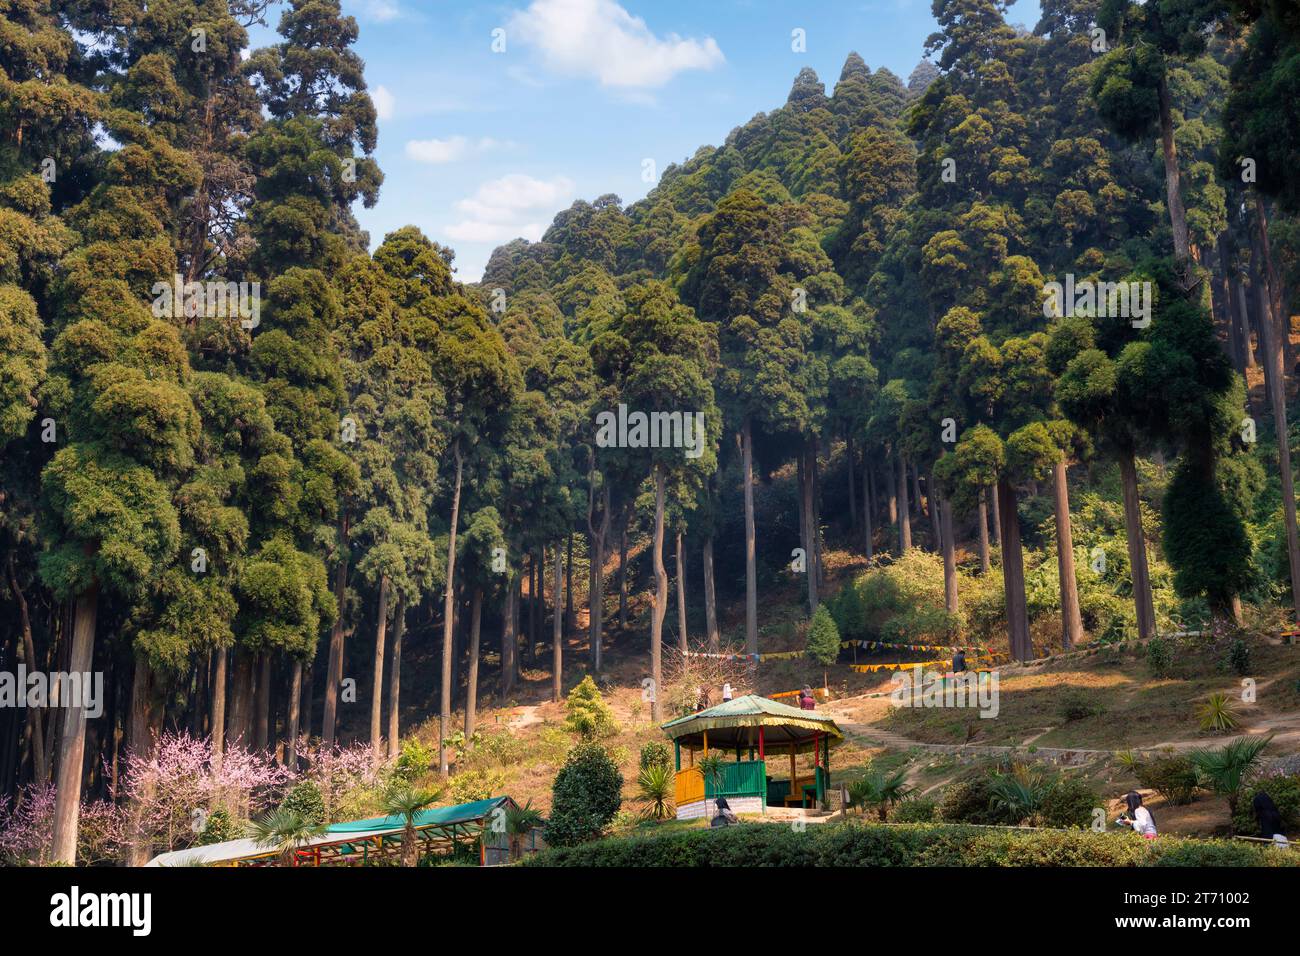 Lamhatta Eco Tourism park located on a mountain slope surrounded with pine trees is a popular tourist destination at Darjeeling, West Bengal, India Stock Photo